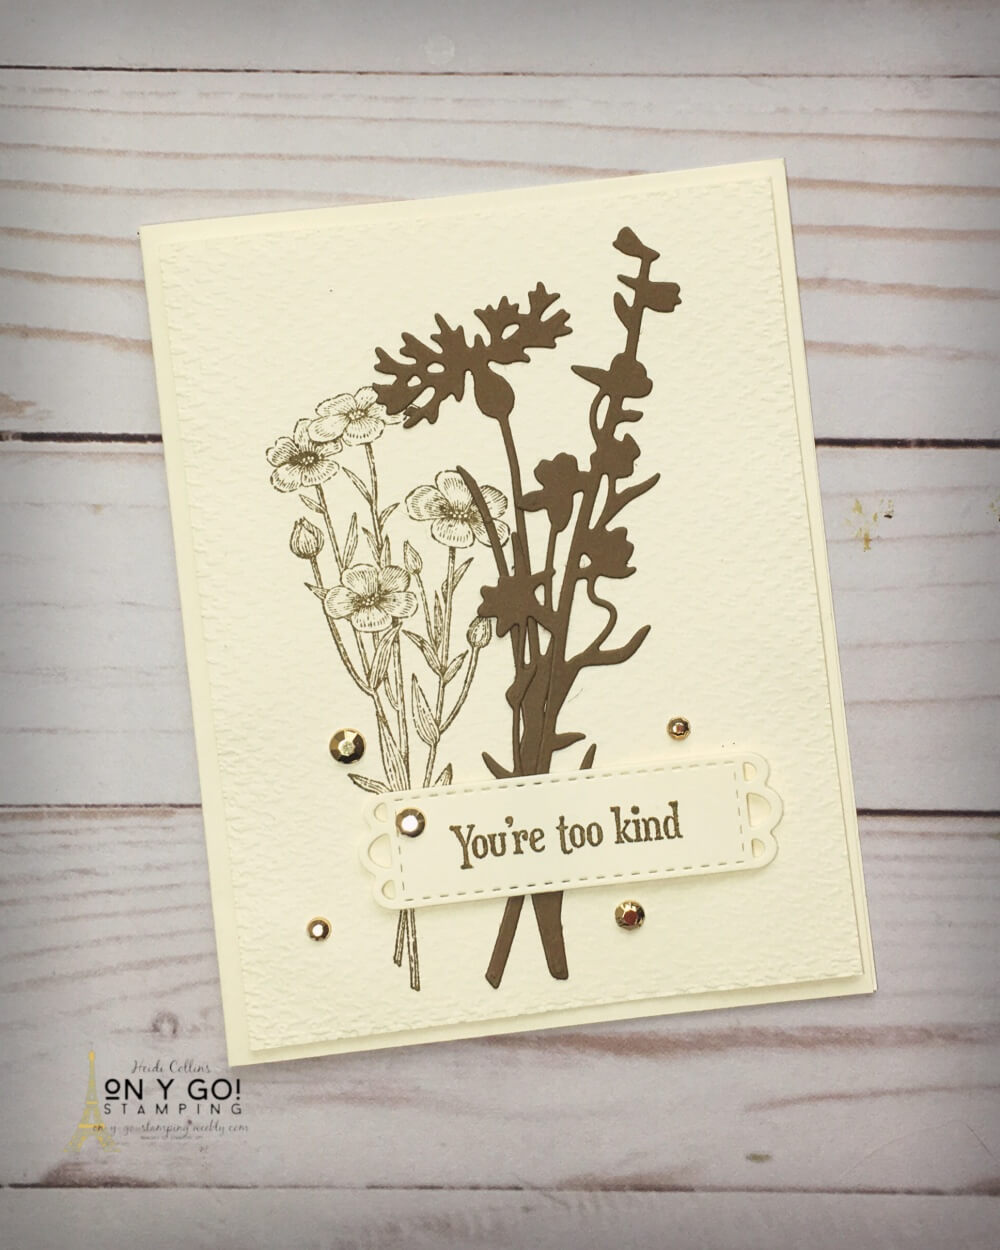 Handmade floral card using the Quiet Meadow stamp set and Meadow dies from Stampin' Up! This card has beautiful texture and some fun bling!